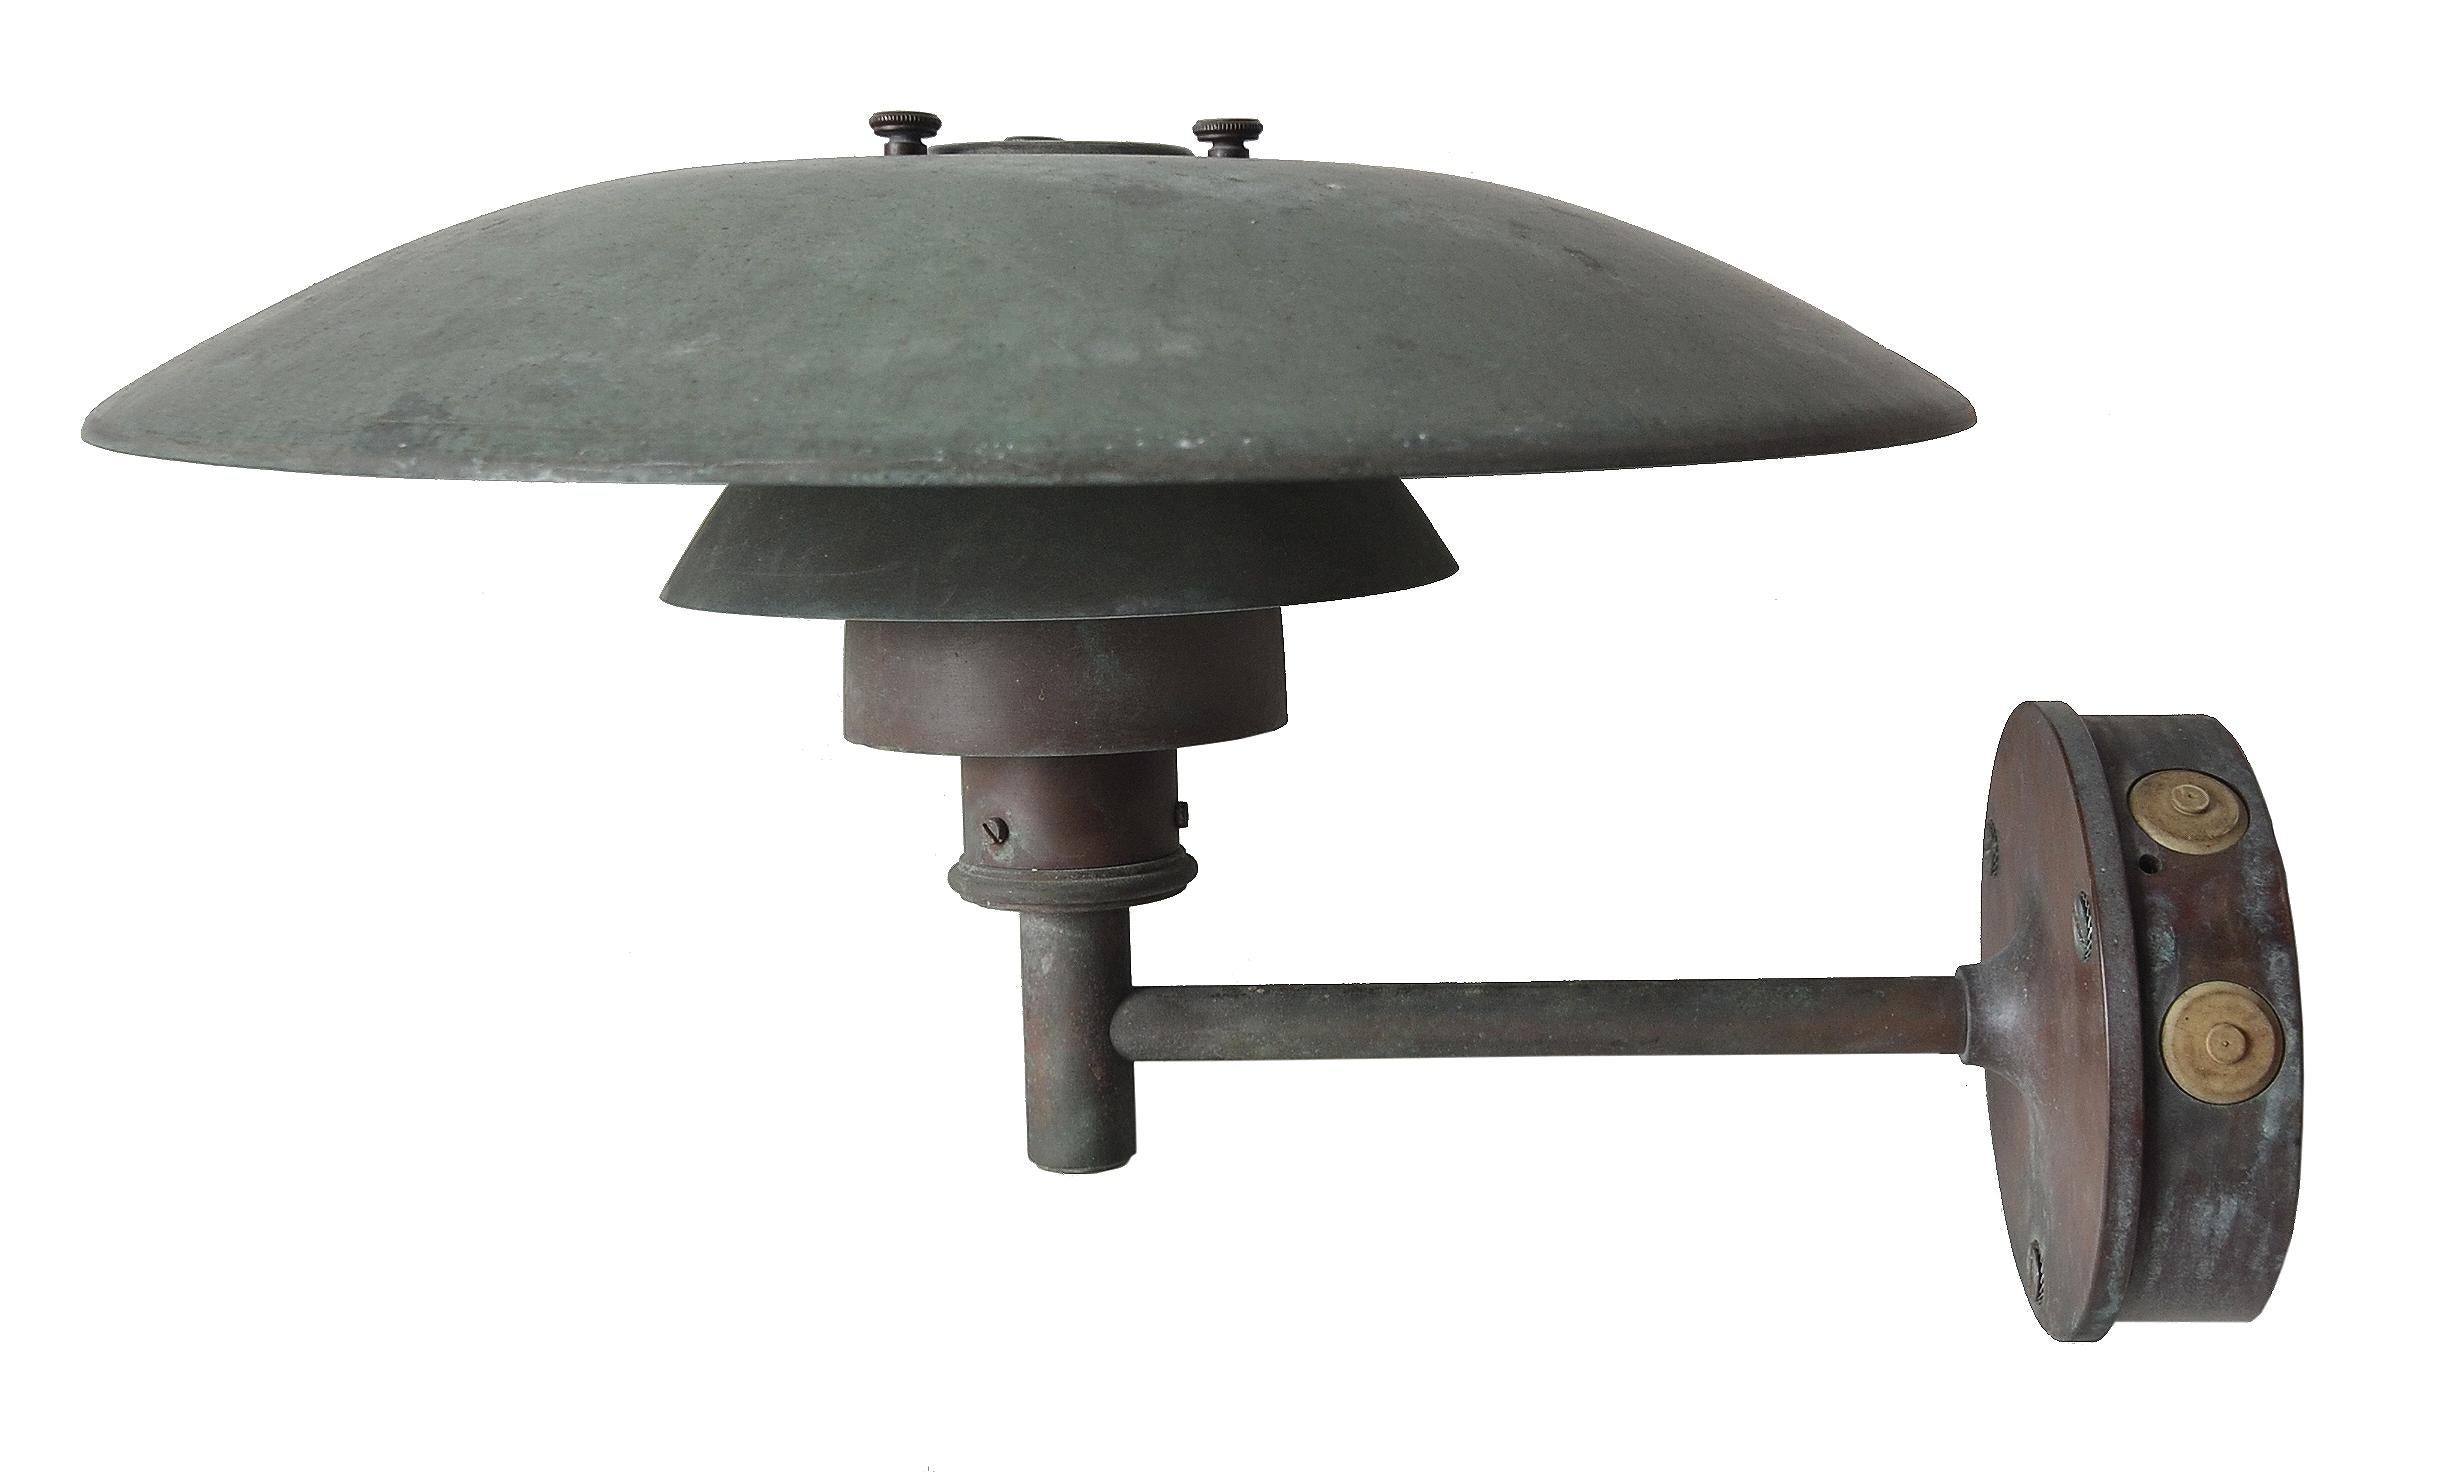 Poul Henningsen design copper wall lamps, model 4,5 /3, manufactured by Louis Poulsen. Incredible paying on these. An iconic lamp brought to the outdoors.
Please note:
These have been newly re-wired to conform to North American standards. 
